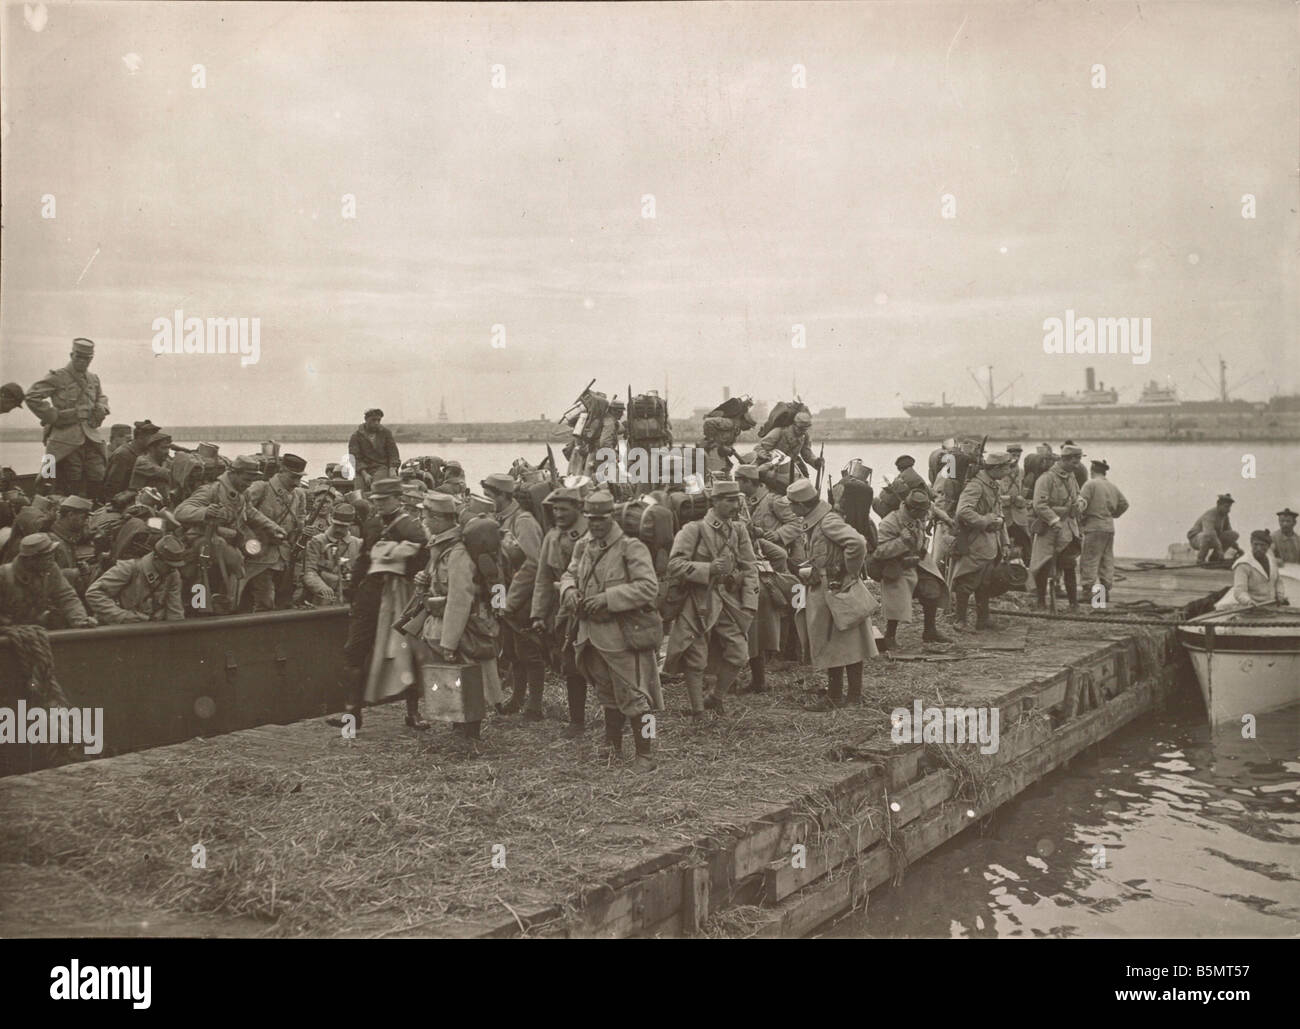 9GR 1915 10 5 A1 1 E Saloniki 1915 Disembaration Photo World War 1 Balkans Landing of the Allied French British troops Army of t Stock Photo